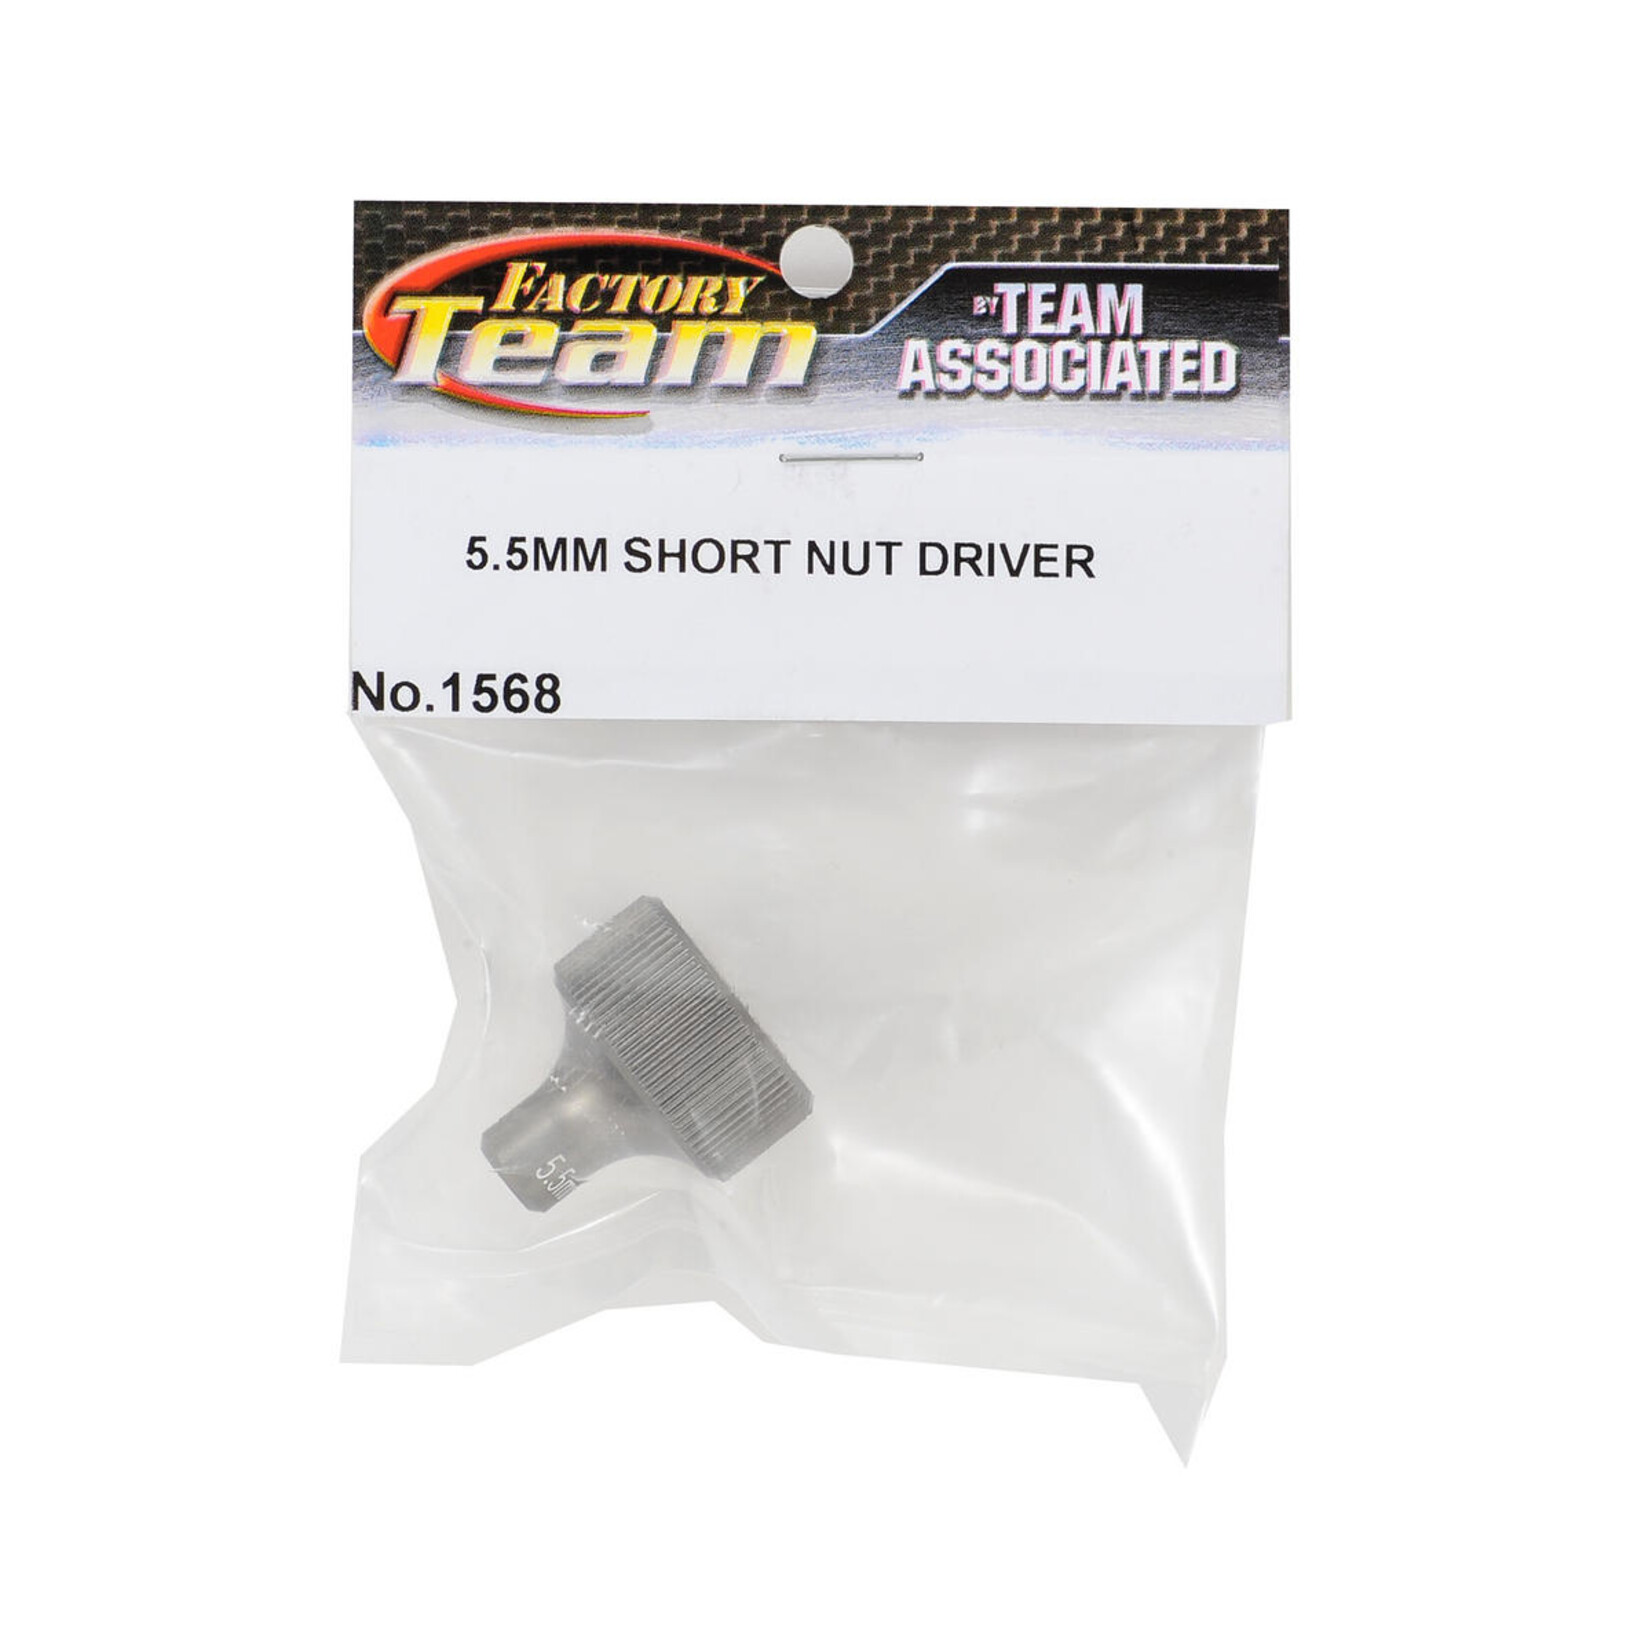 Factory Team Team Associated Factory Team Short Thumb Wrench Nut Driver (5.5mm) #1568